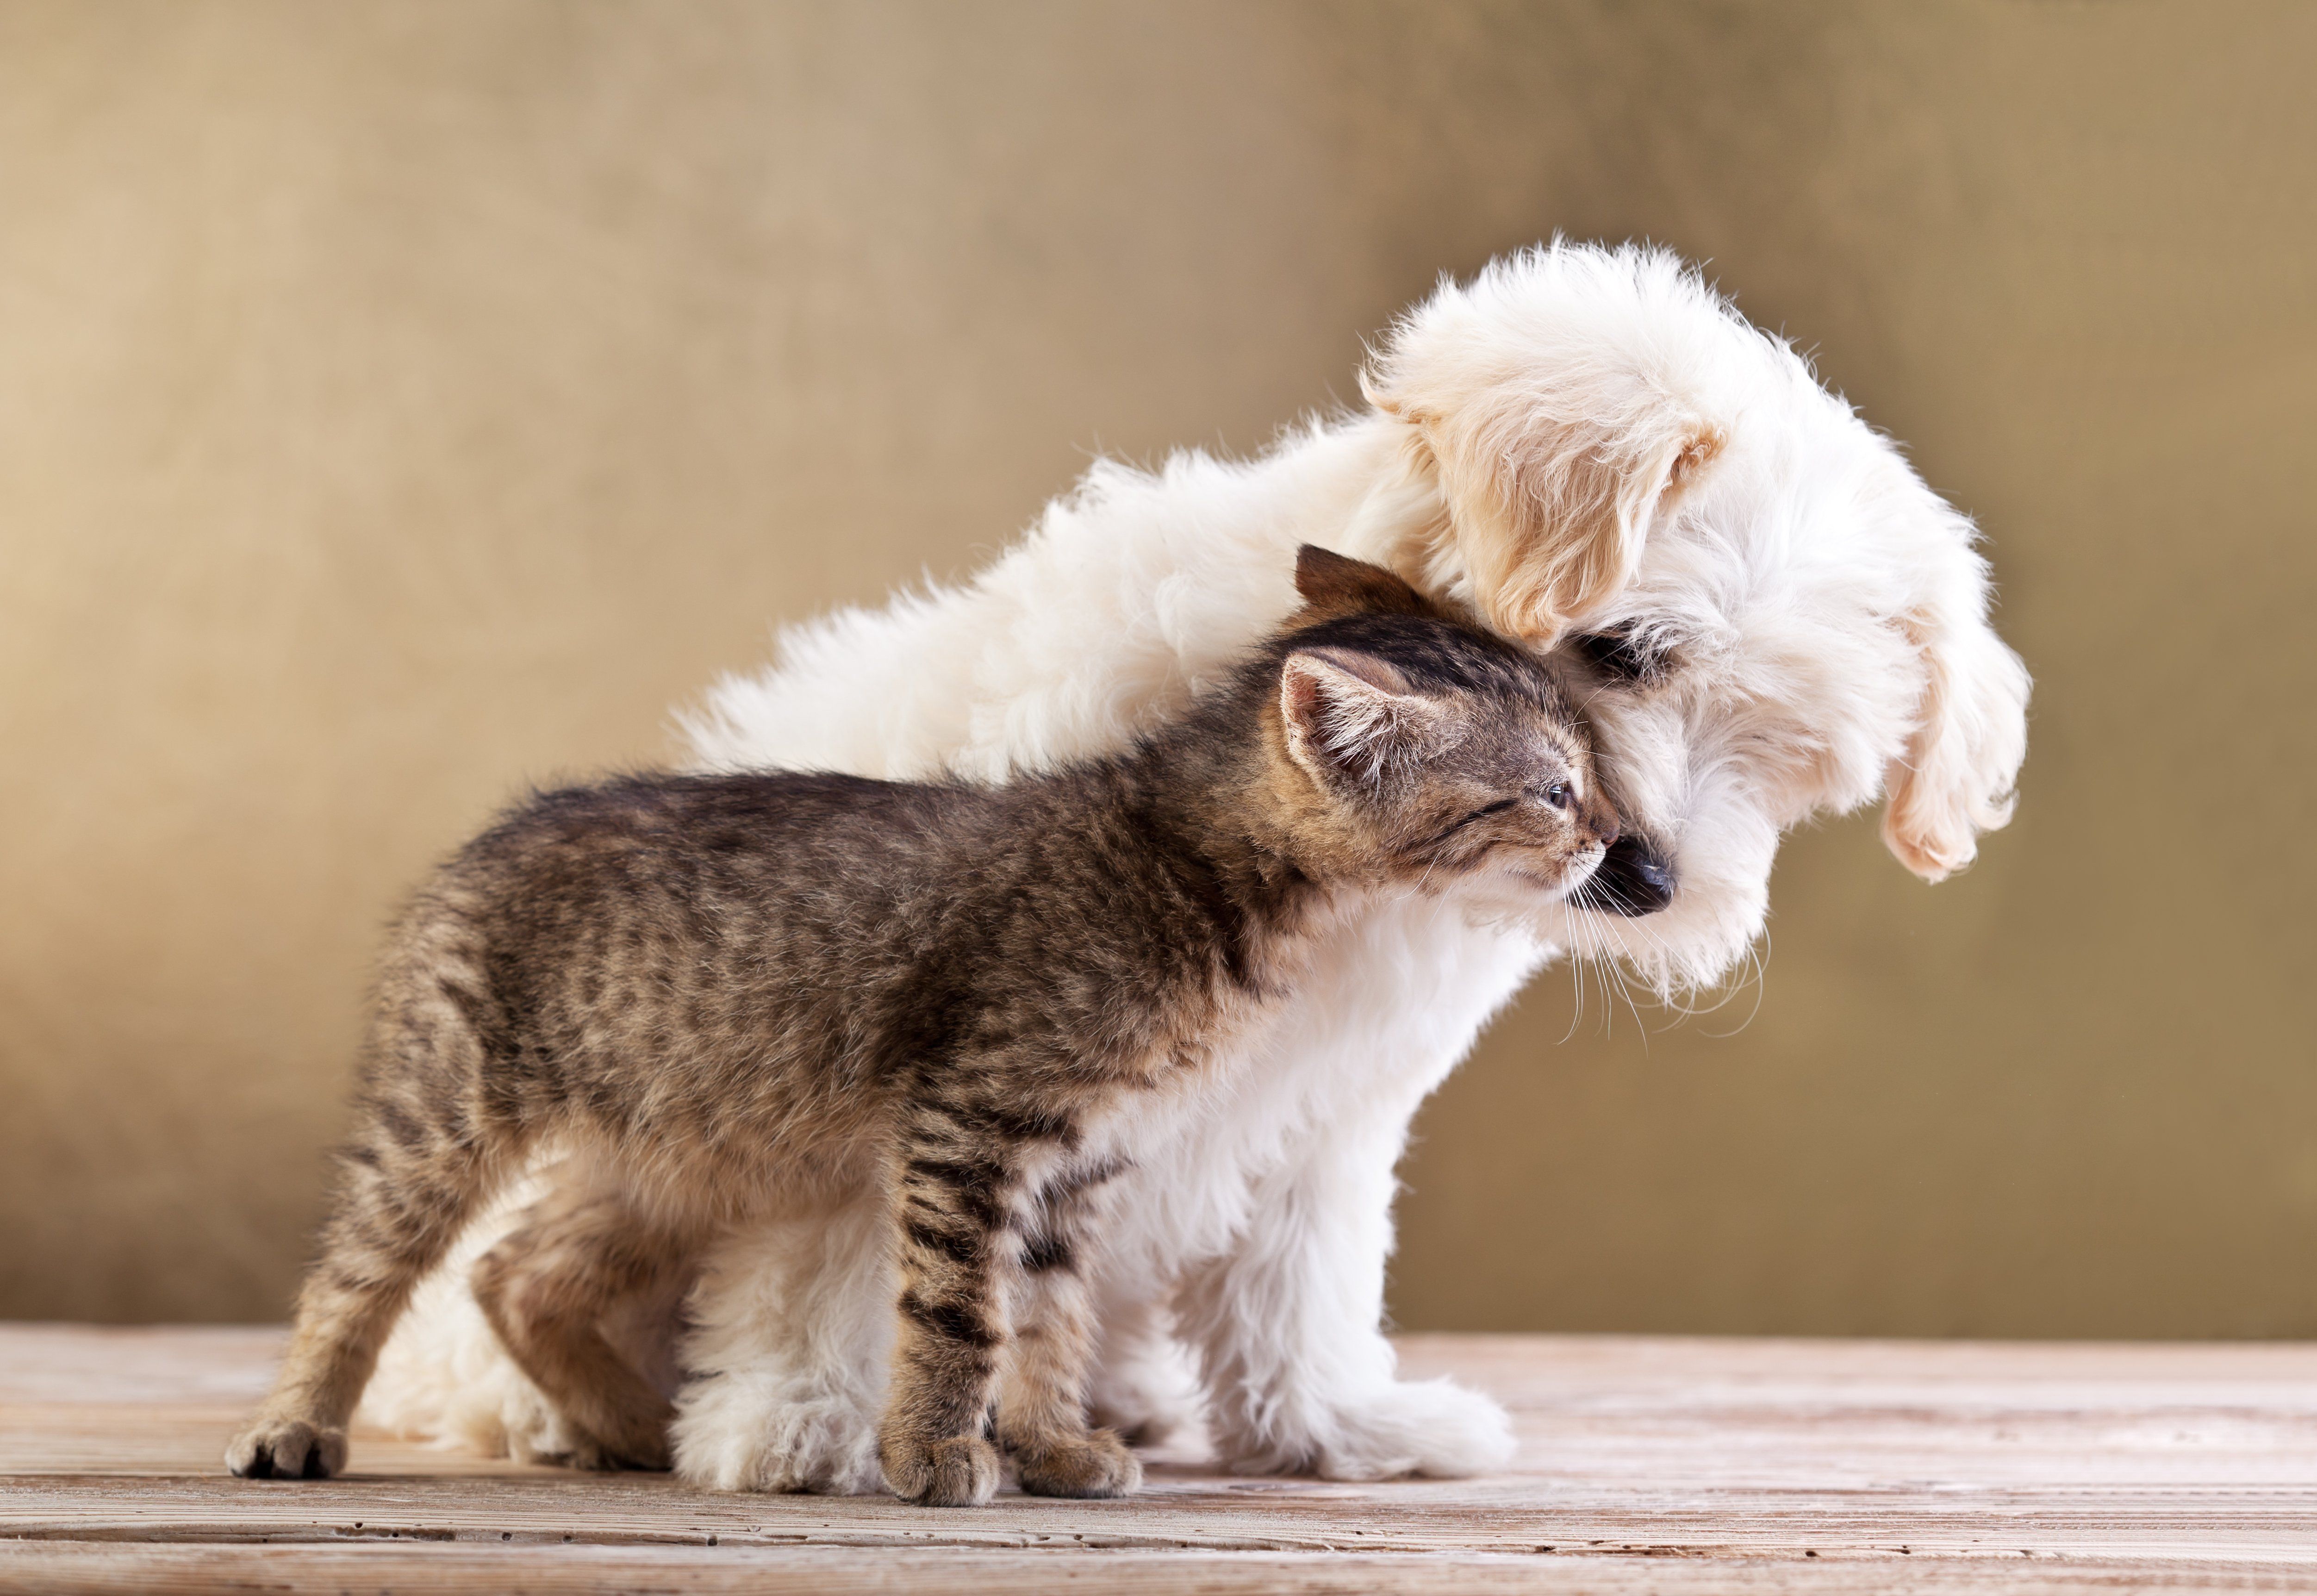 Cats Dogs Two Animals puppy kitten wallpaper | 5006x3448 | 348802 ...